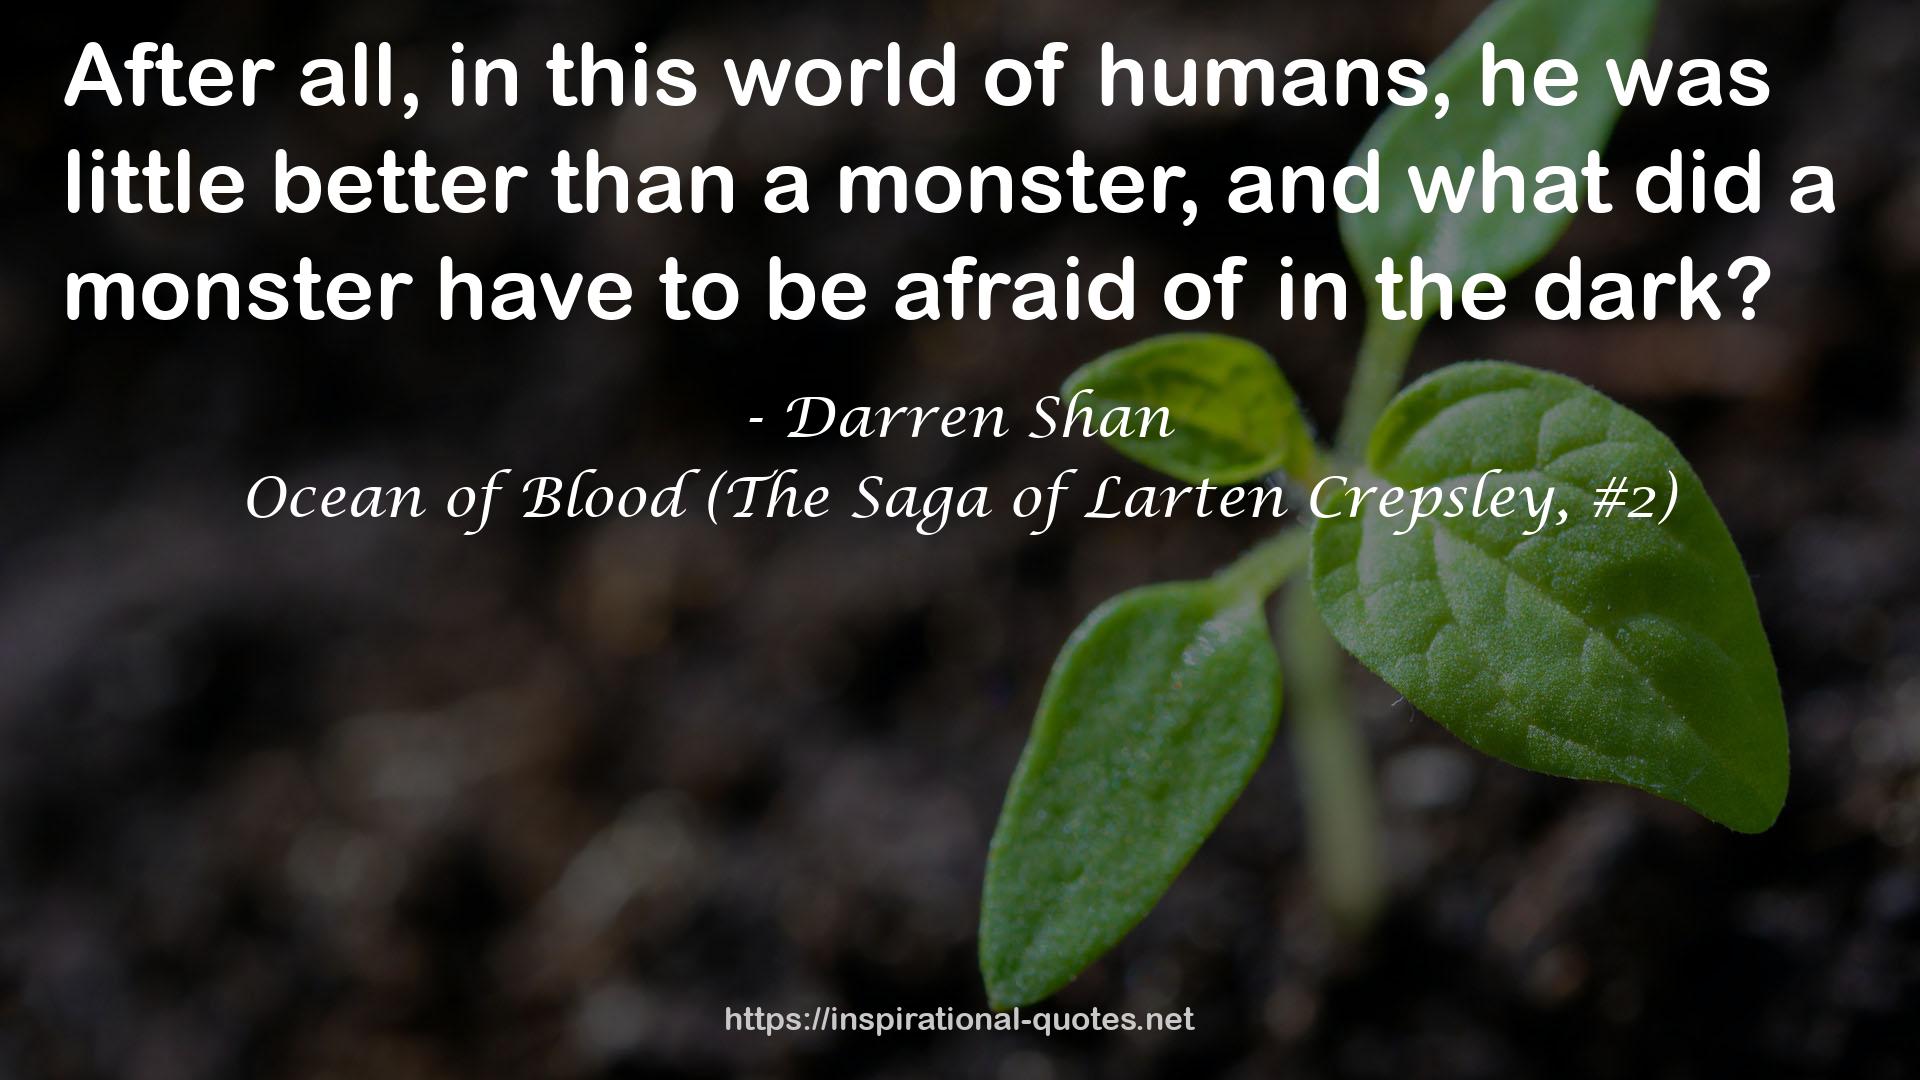 Ocean of Blood (The Saga of Larten Crepsley, #2) QUOTES